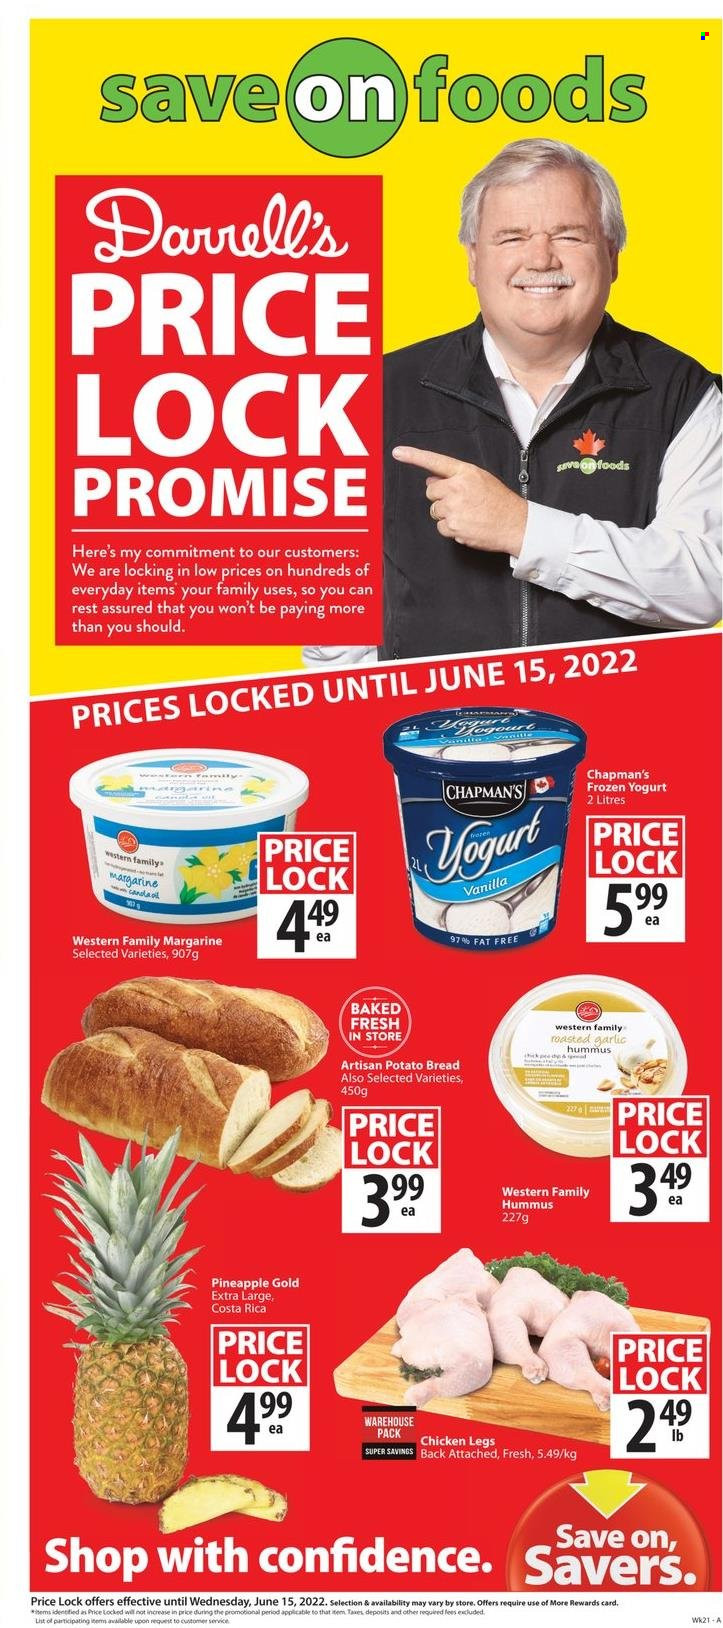 Save-On-Foods flyer  - May 19, 2022 - May 25, 2022.